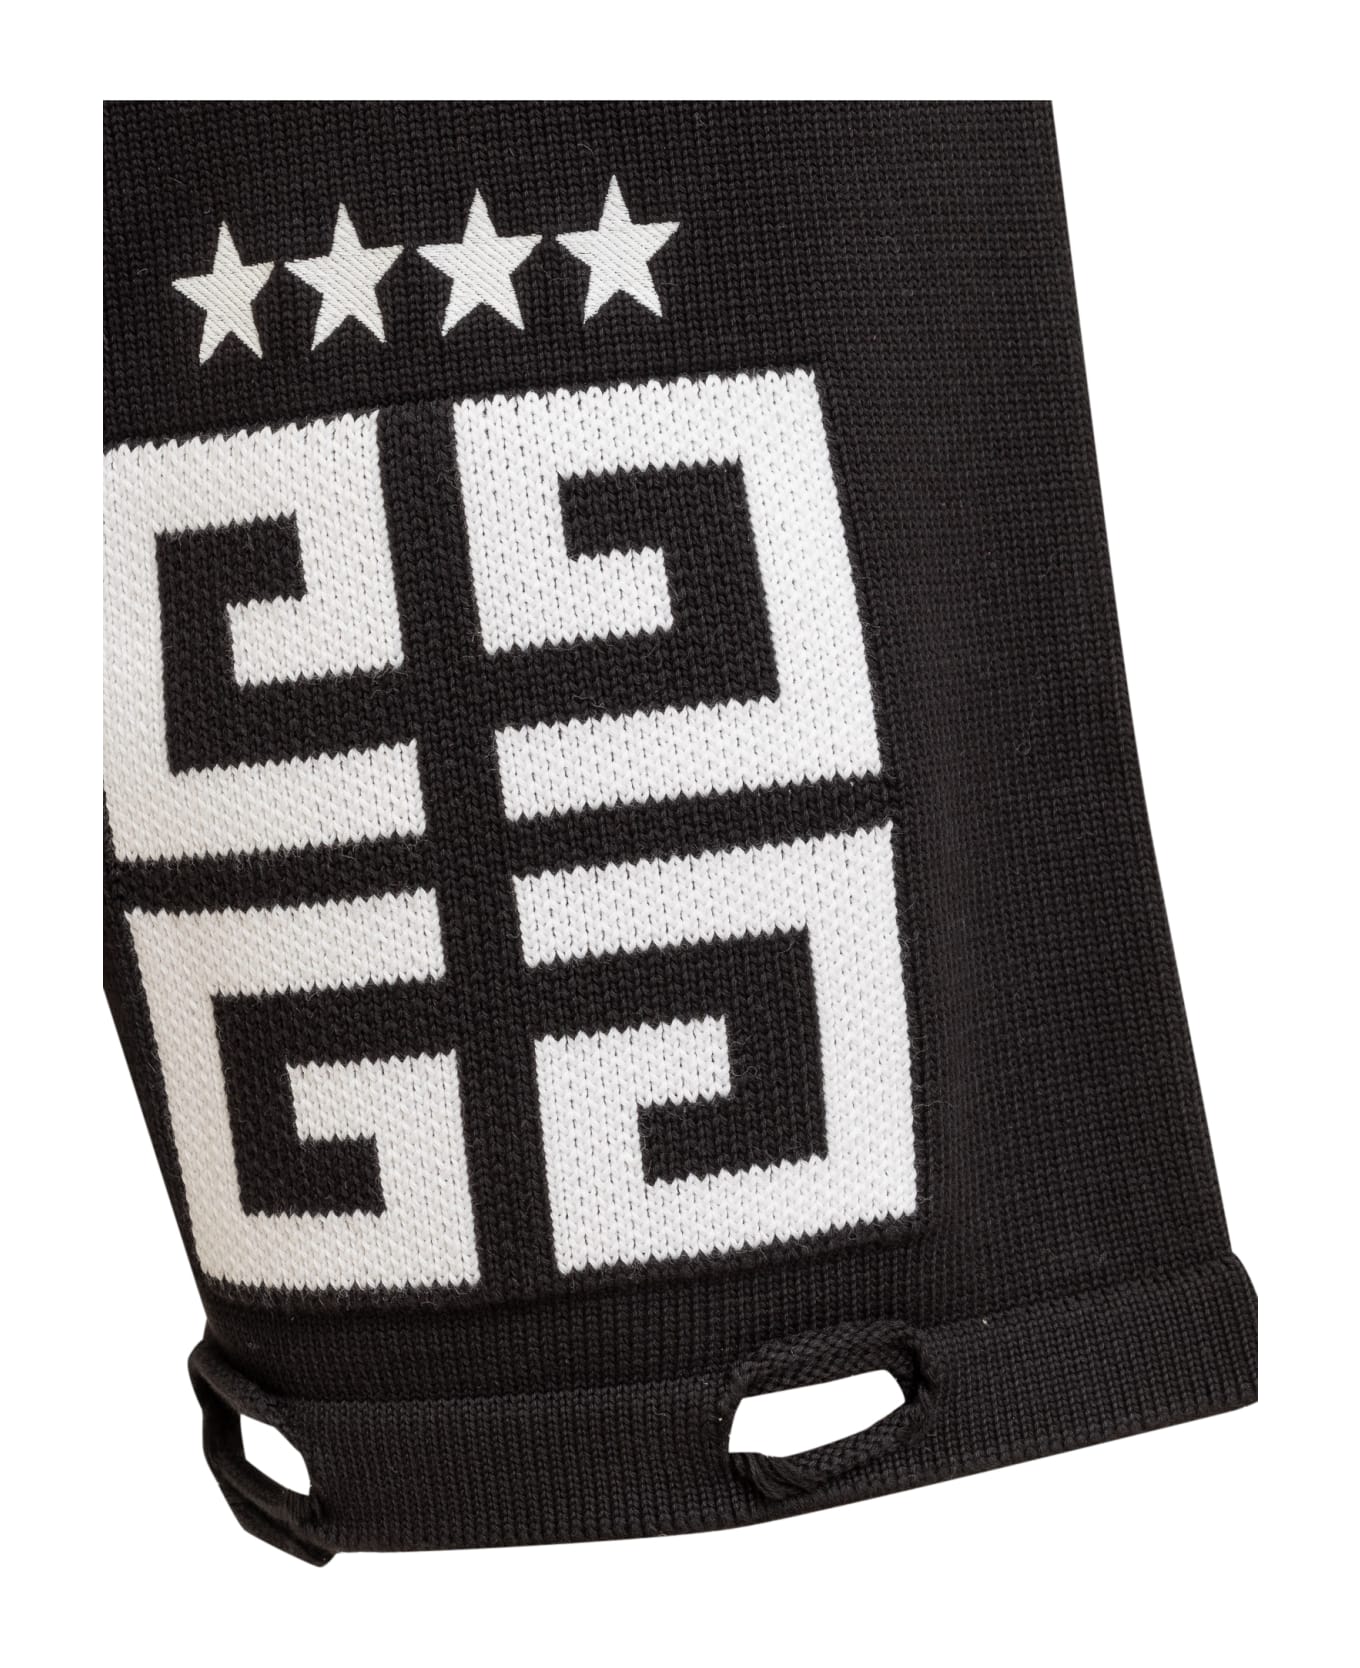 Givenchy Embroidered Knit Shorts - BLACK/WHITE